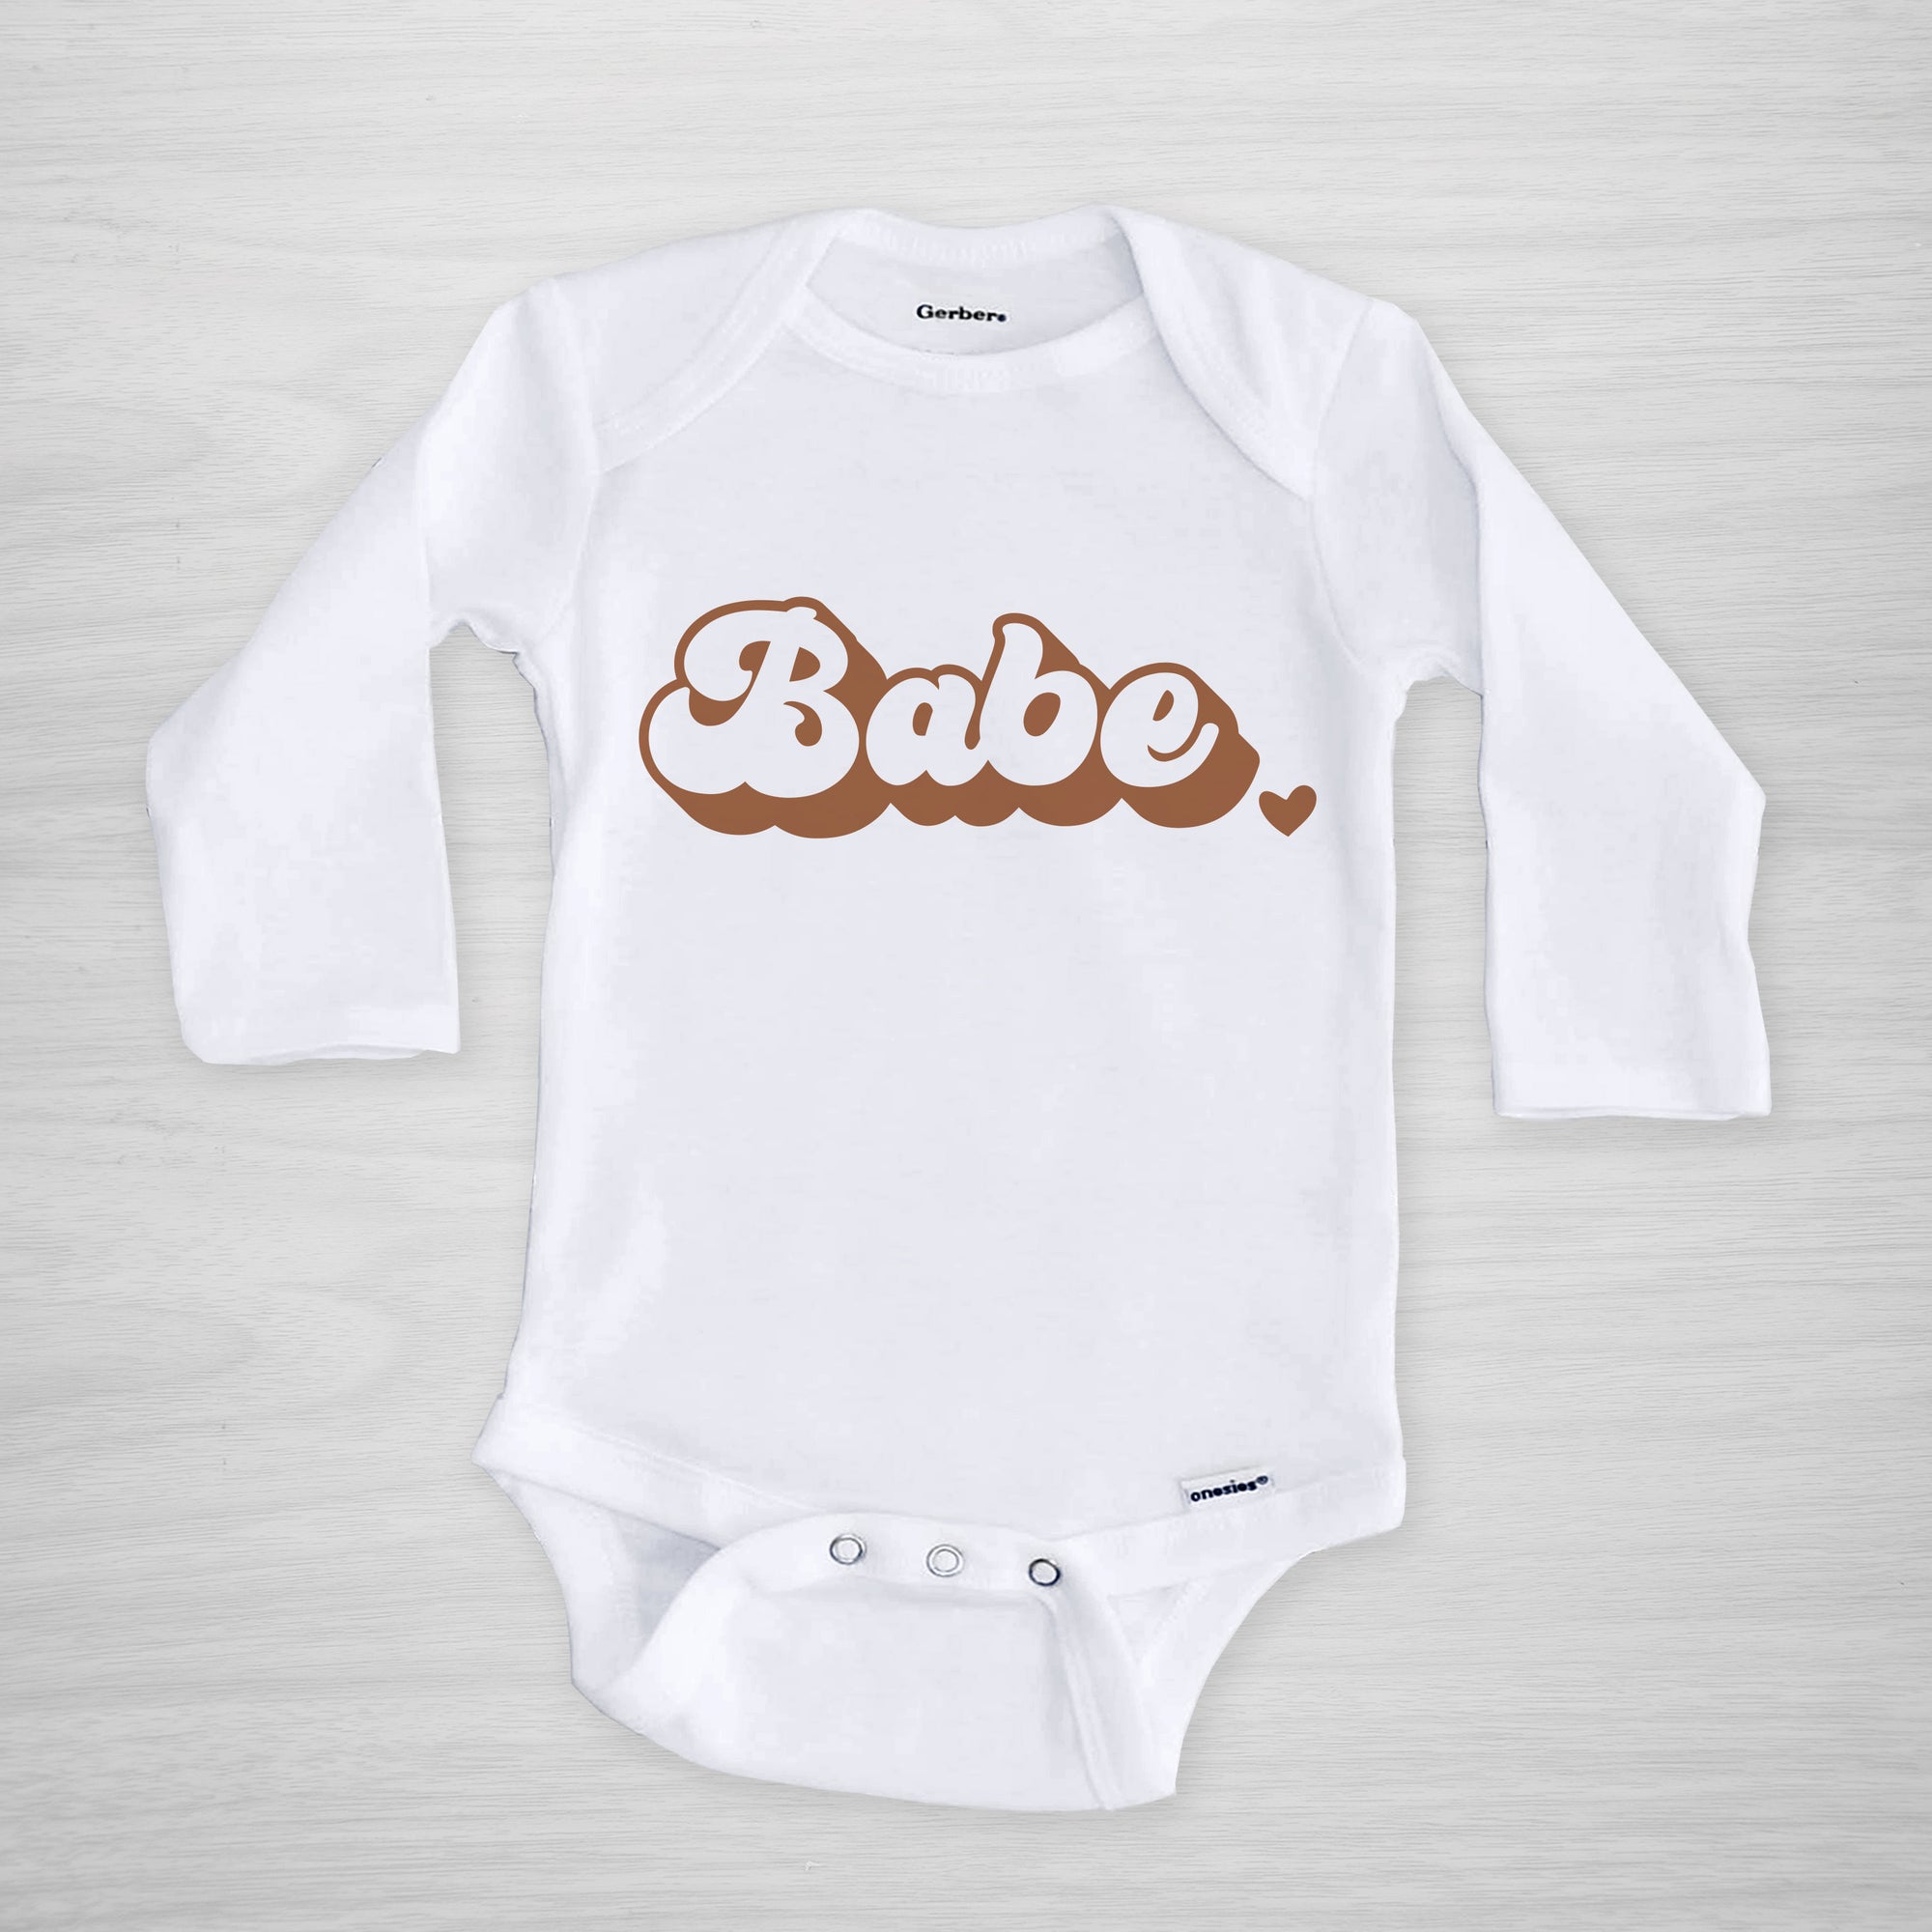 Babe onesie with retro styling and neutral colors, Pipsy.com, long sleeved